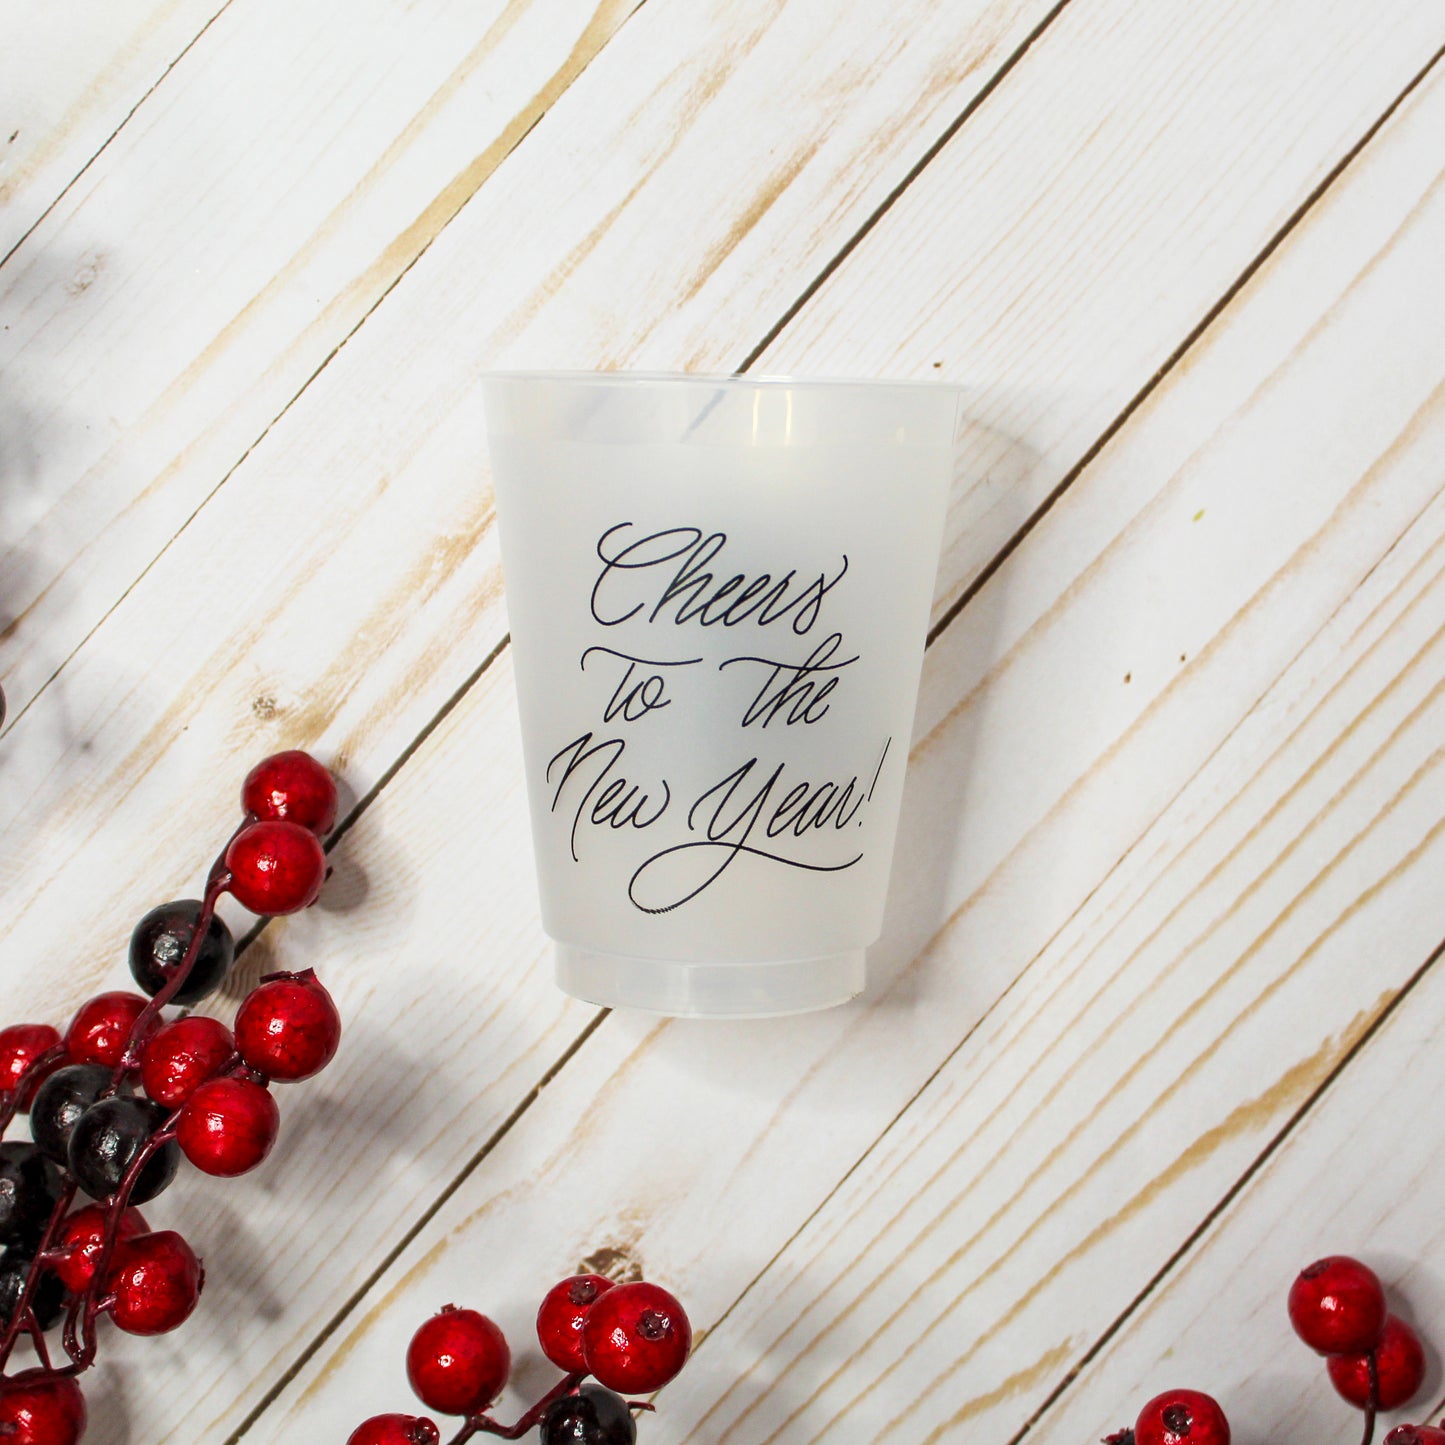 Cheers to the New Year! Party Cup